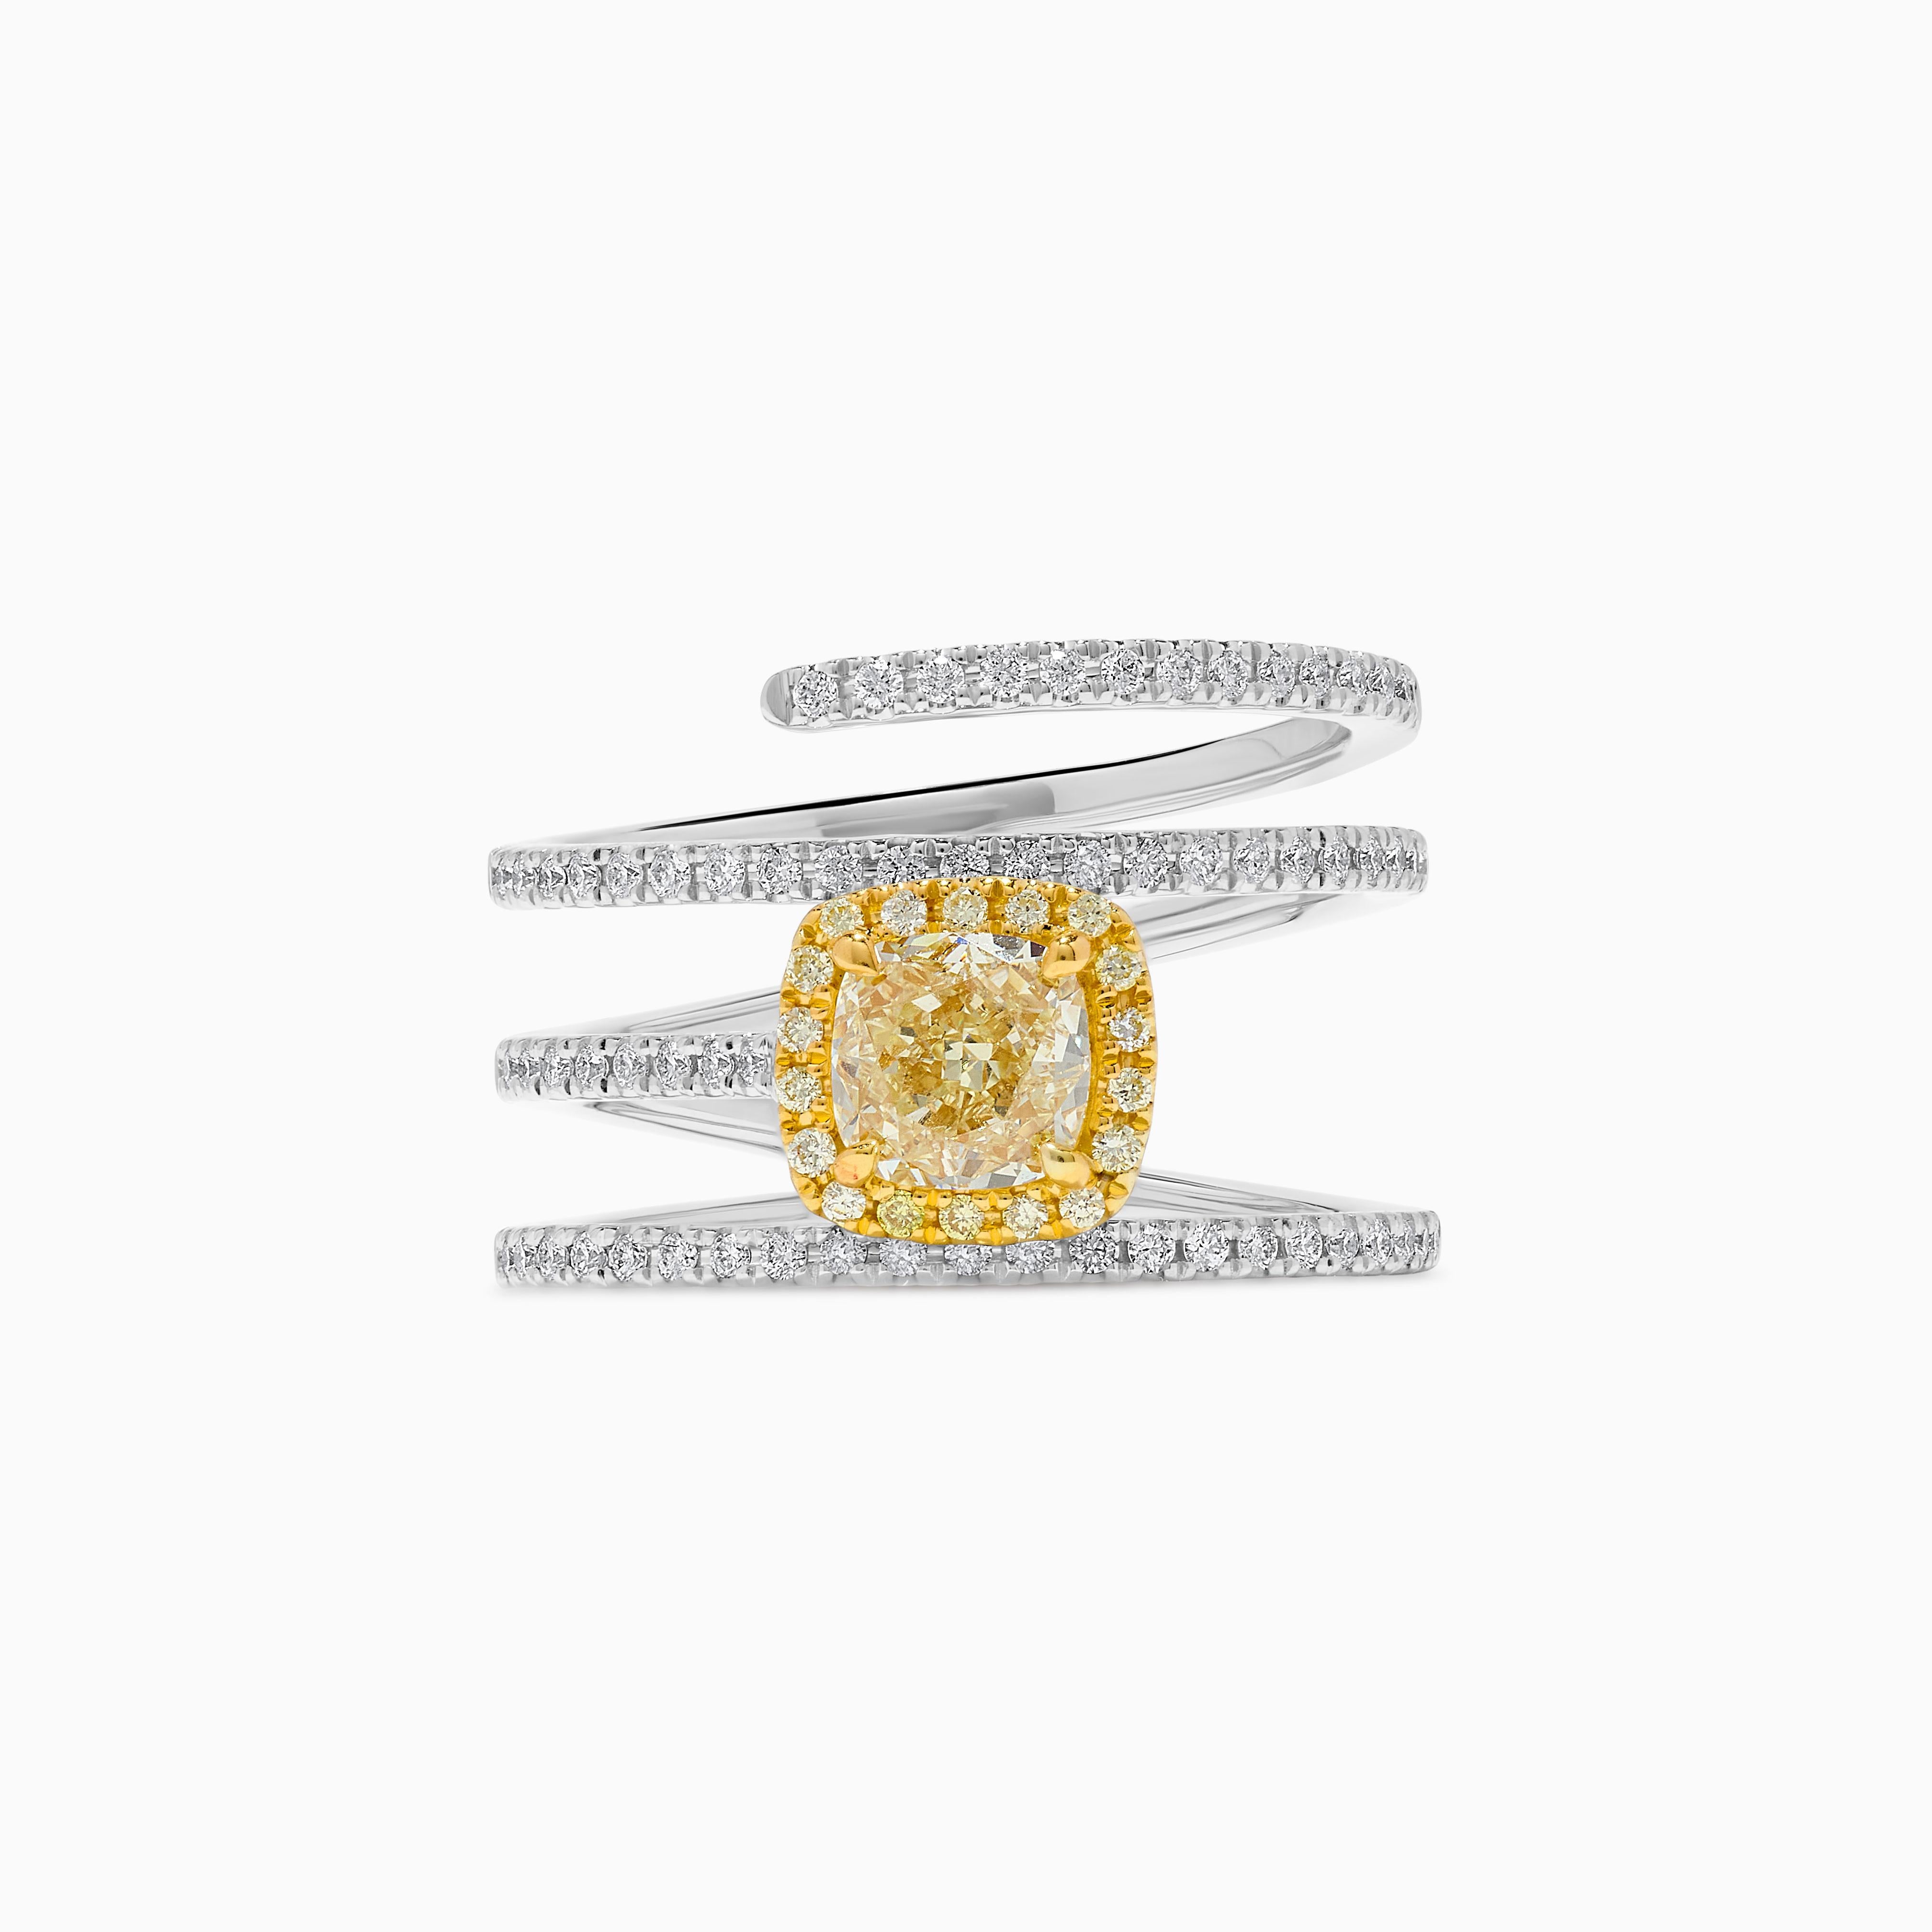 Cushion Cut GIA Certified Natural Yellow Cushion Diamond 1.45 Carat TW Gold Cocktail Ring For Sale